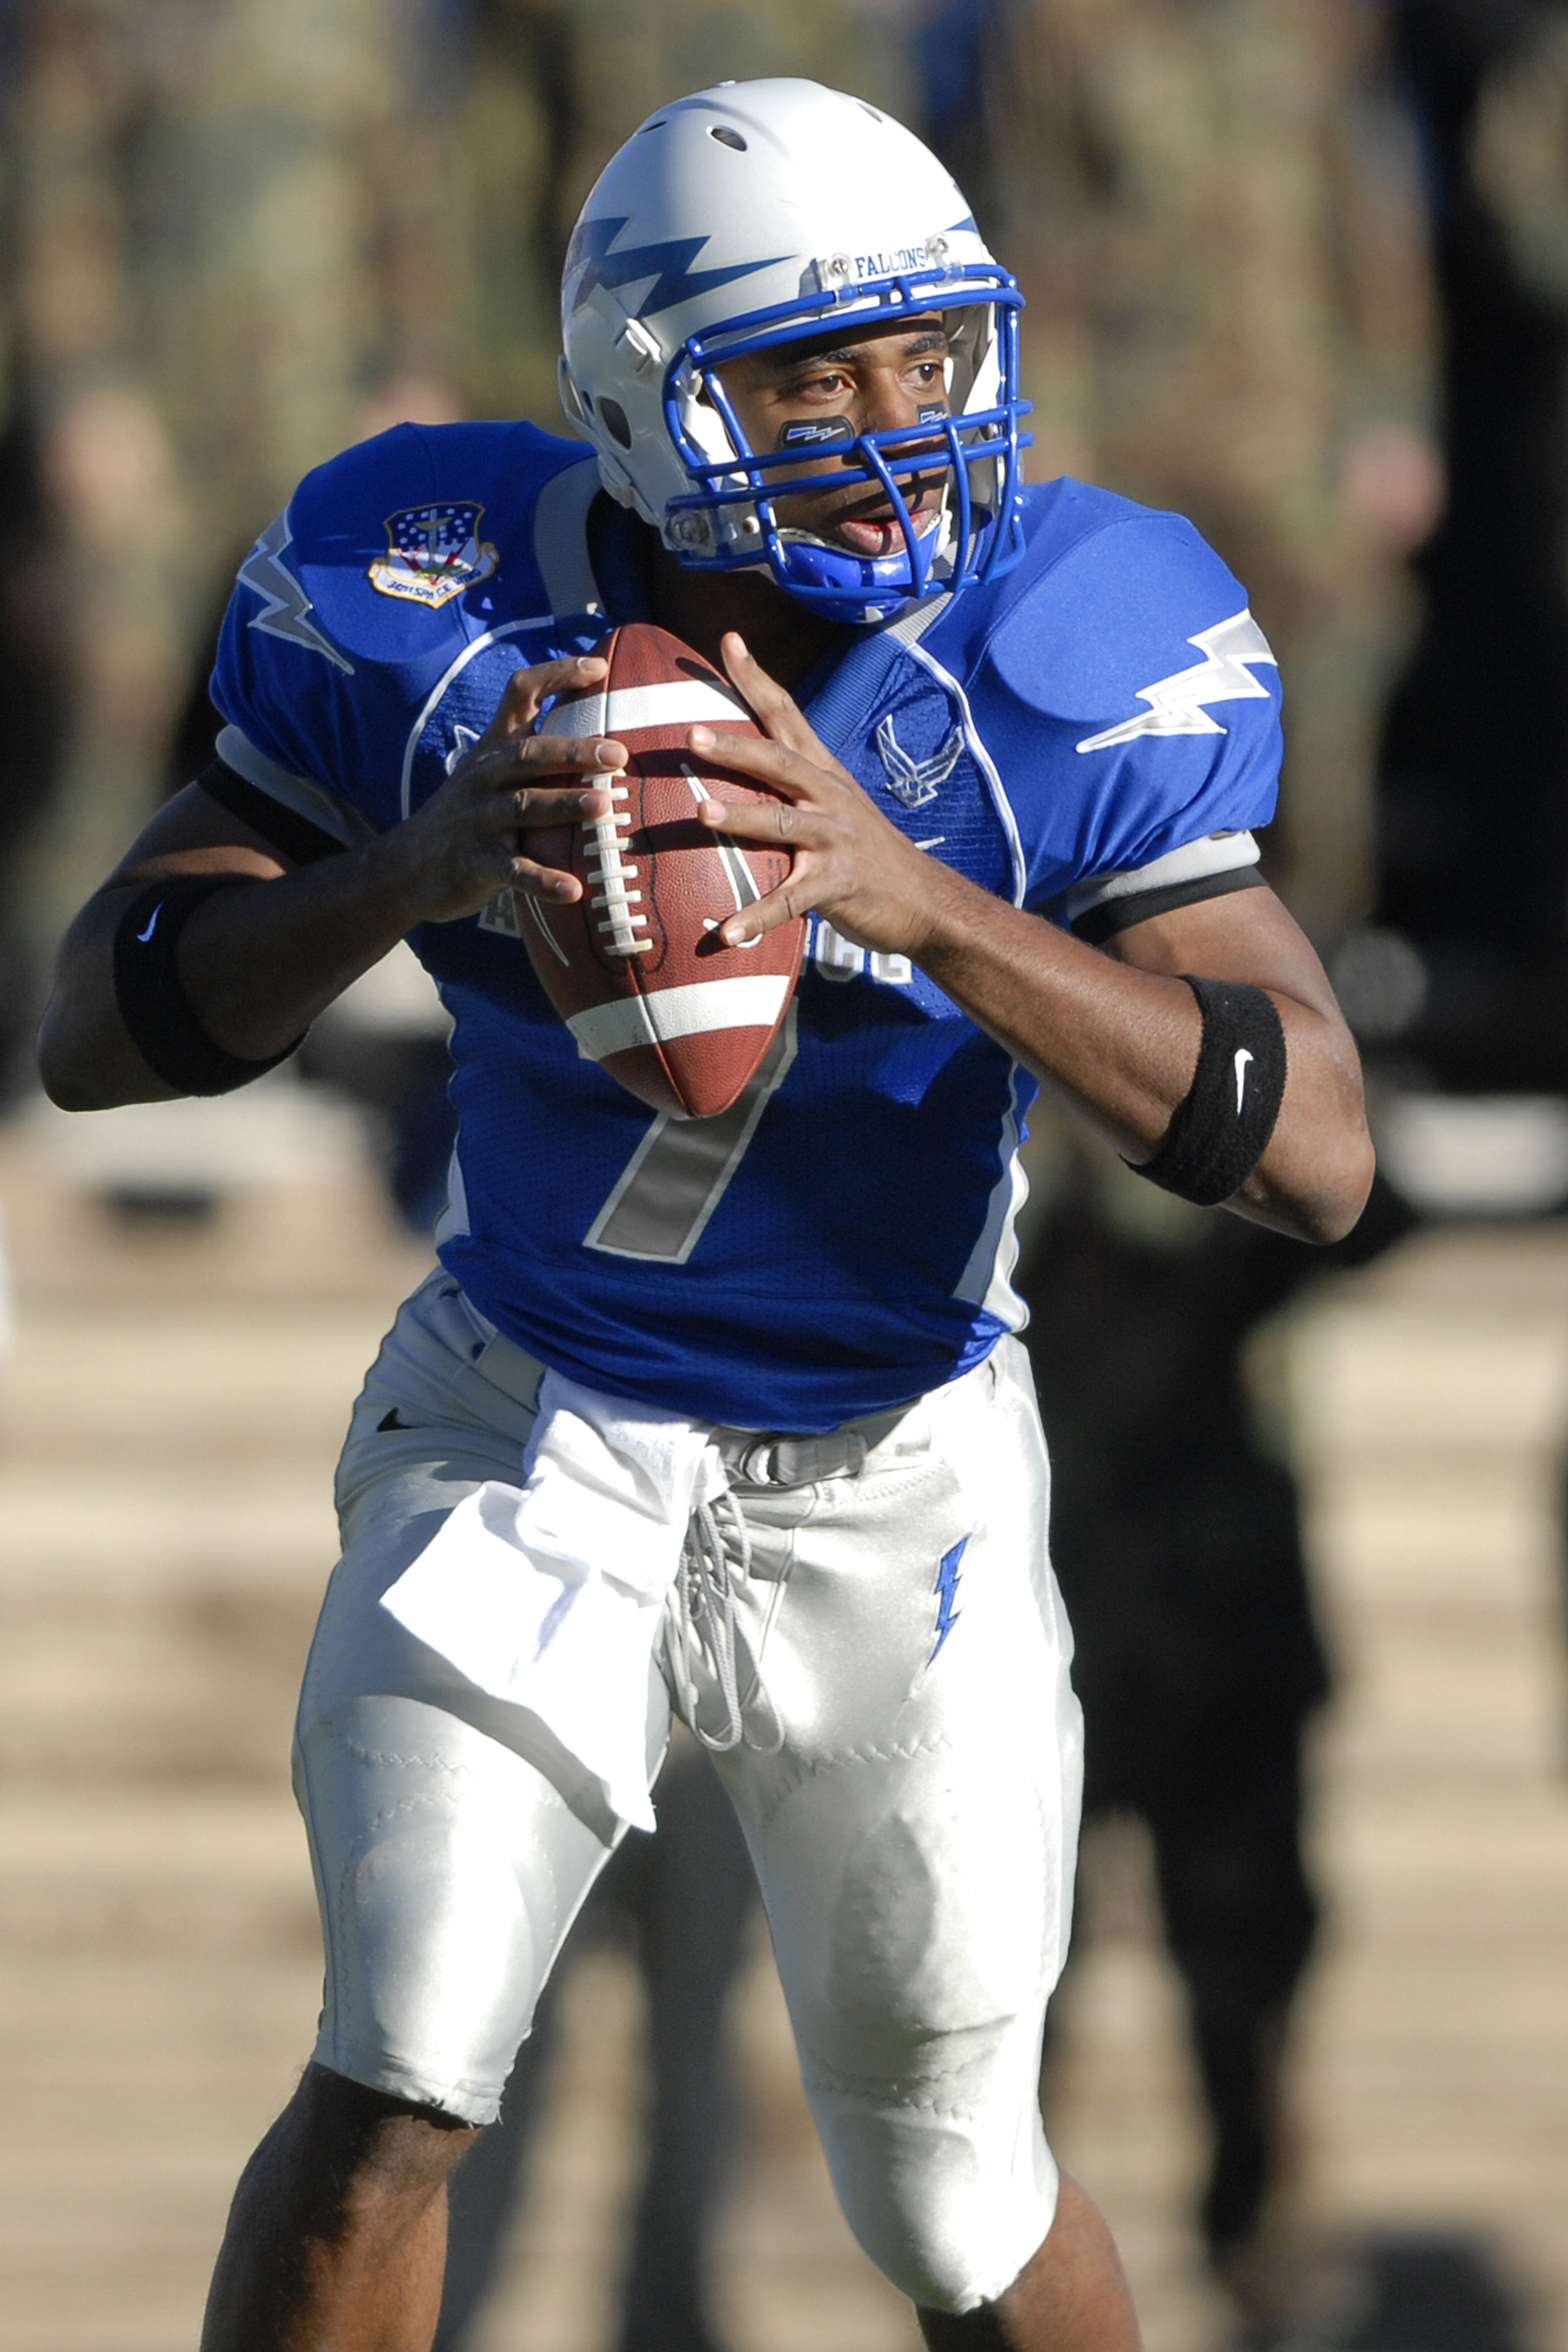 Falcon quarterback honored by Sporting News > Air Force > Article Display